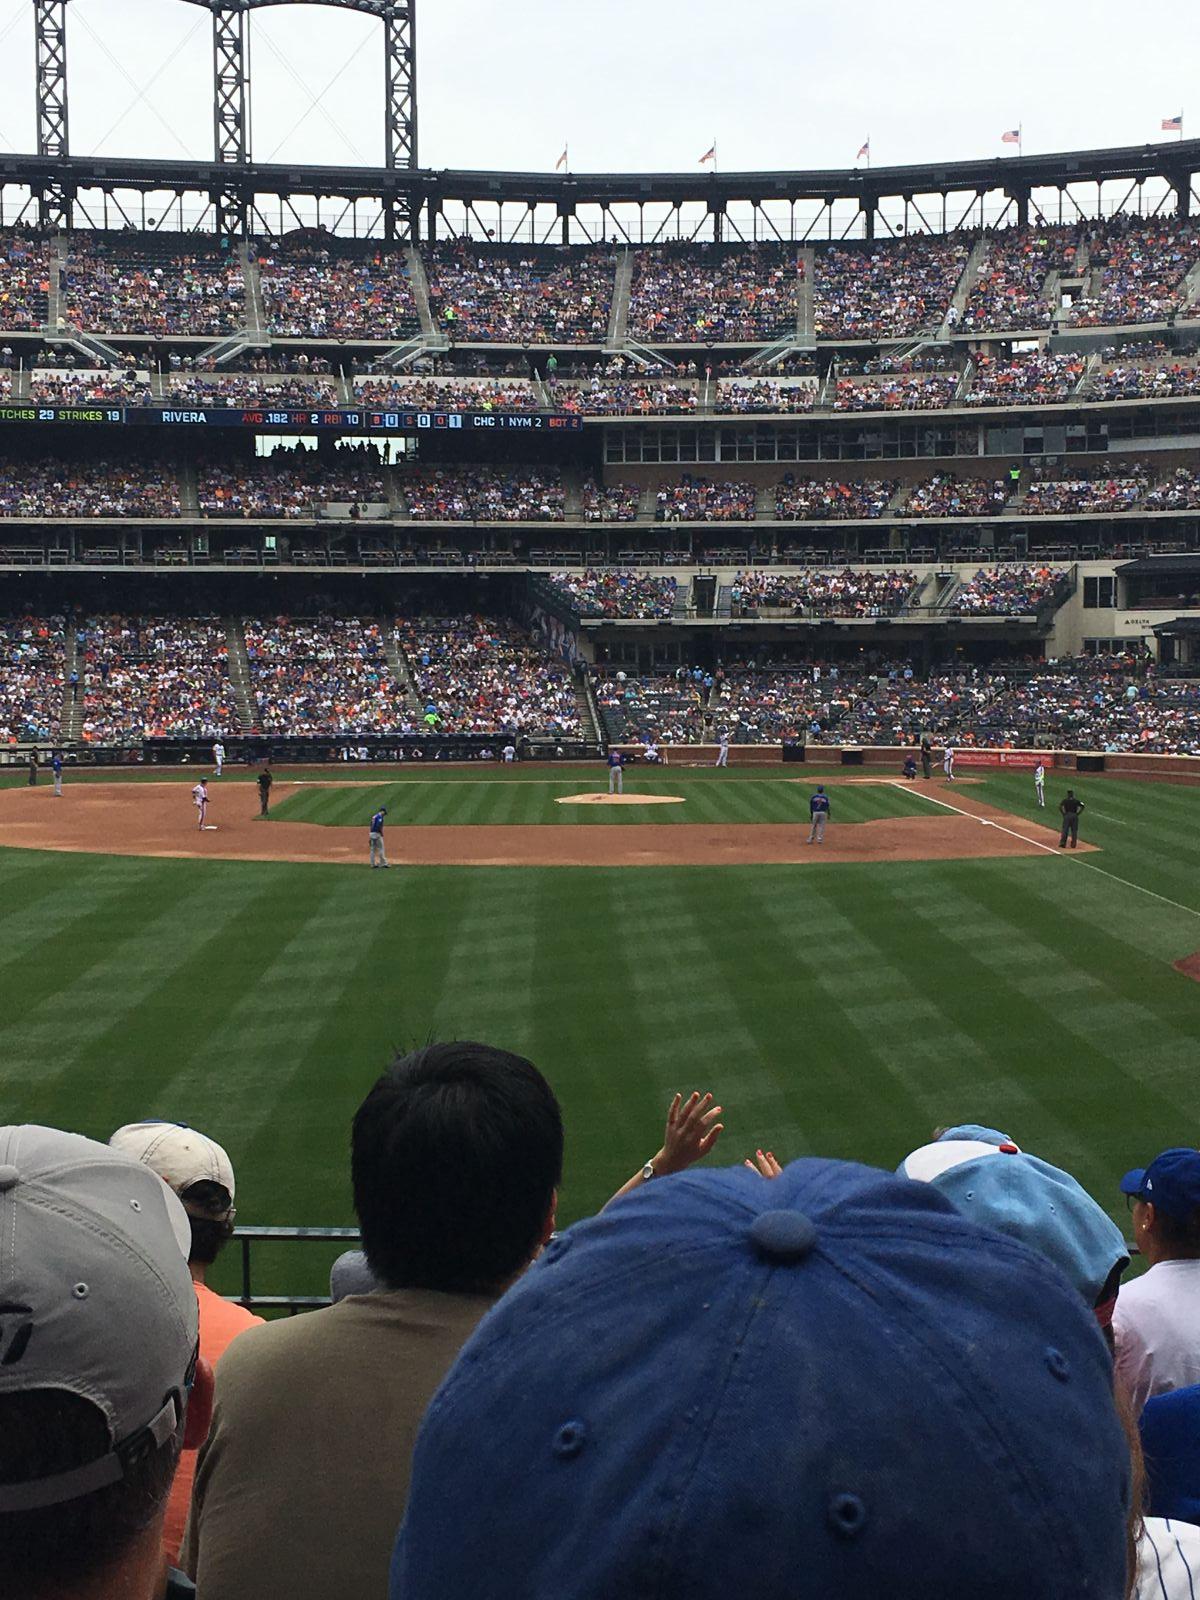 section 134, row 4 seat view  - citi field